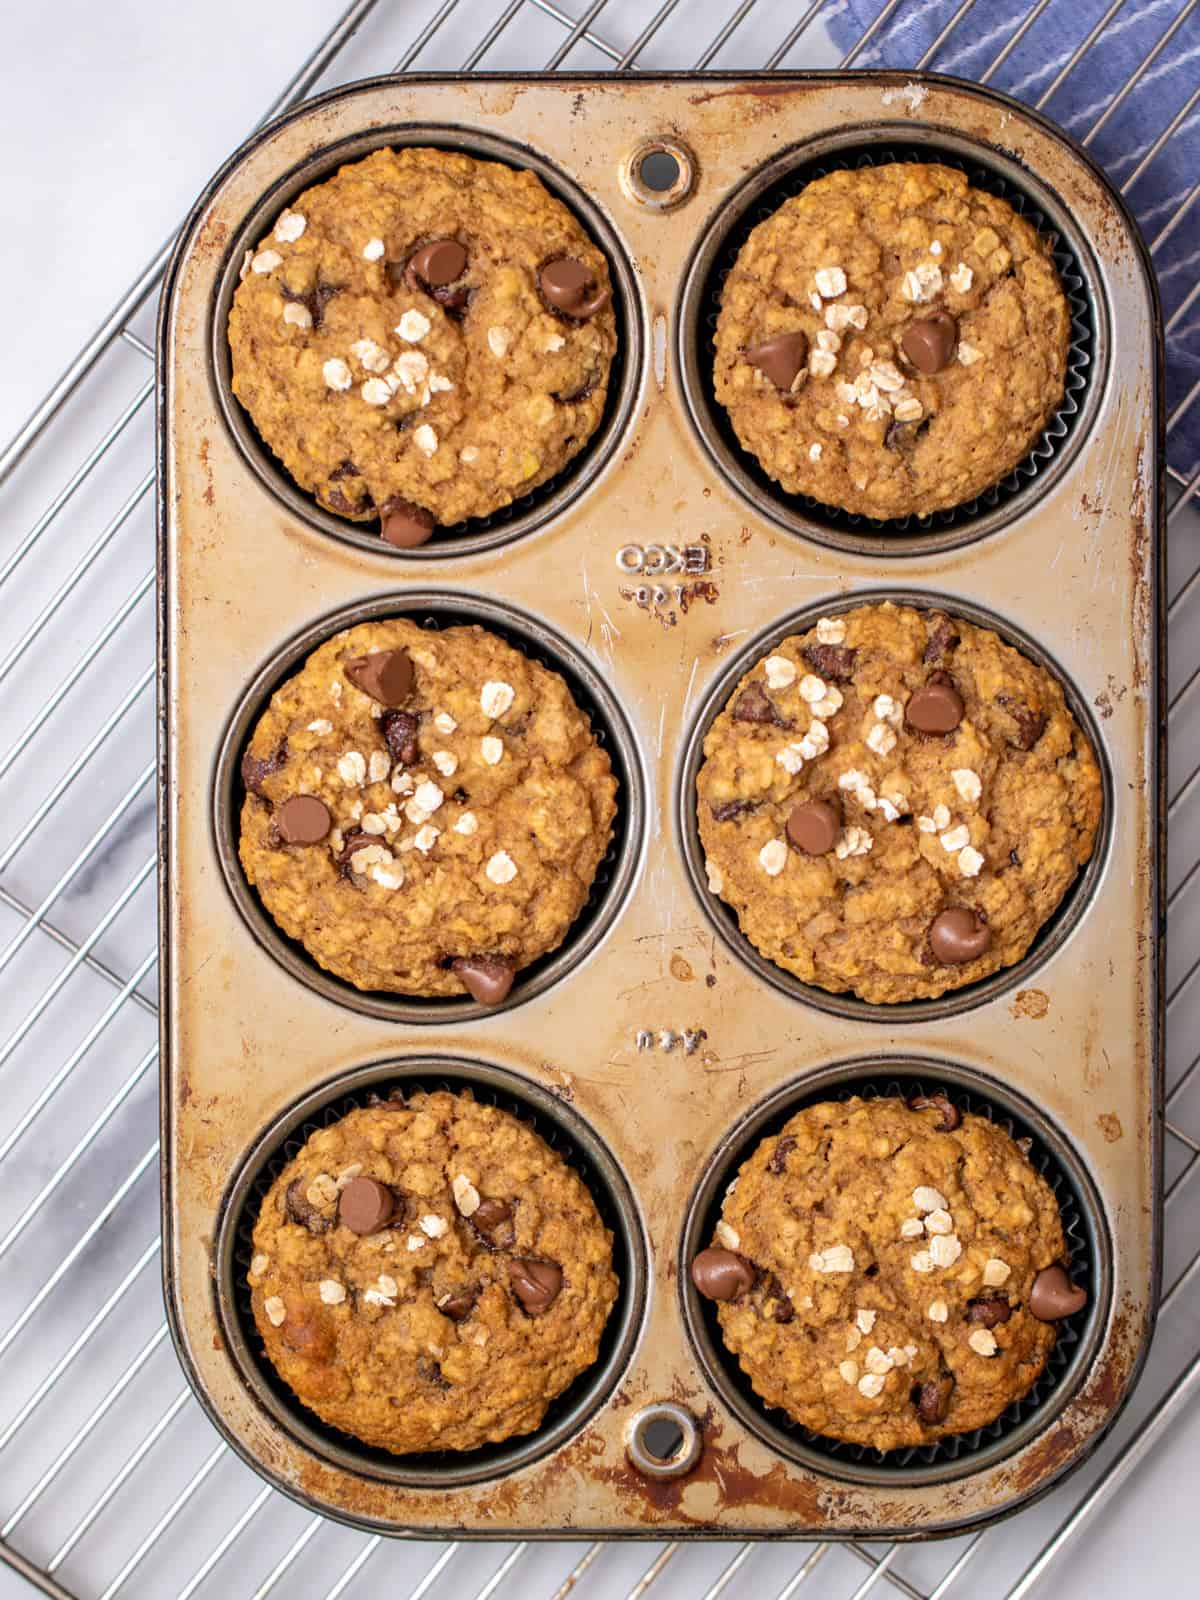 Baked chocolate chip muffins in muffin tin.